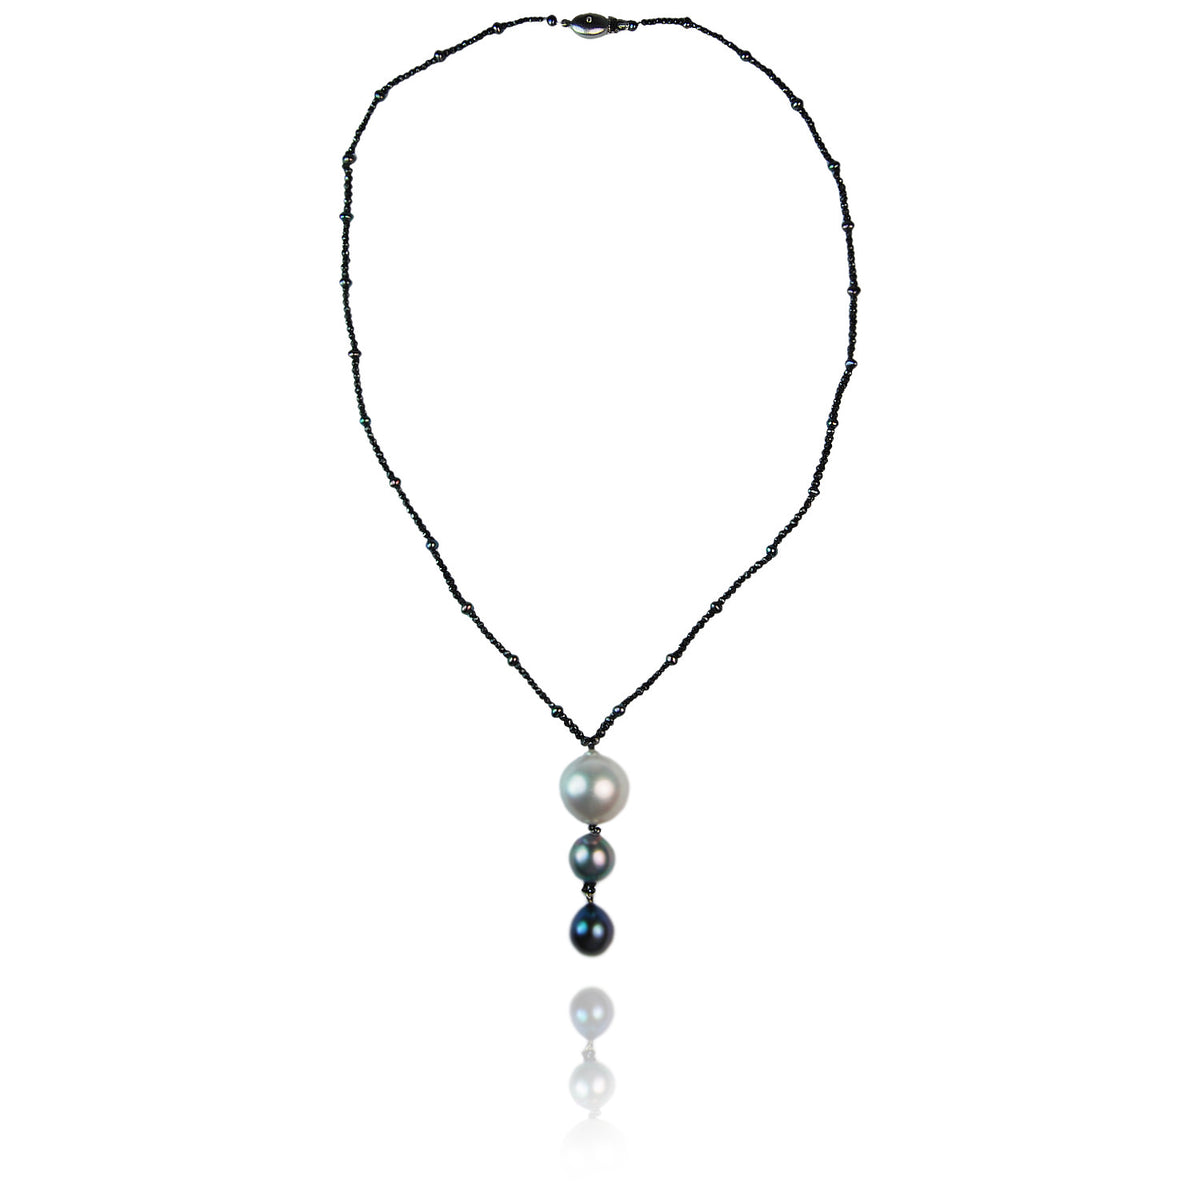 Black Diamond Necklace  With South Sea And Tahitian Pearl Pendant Drop